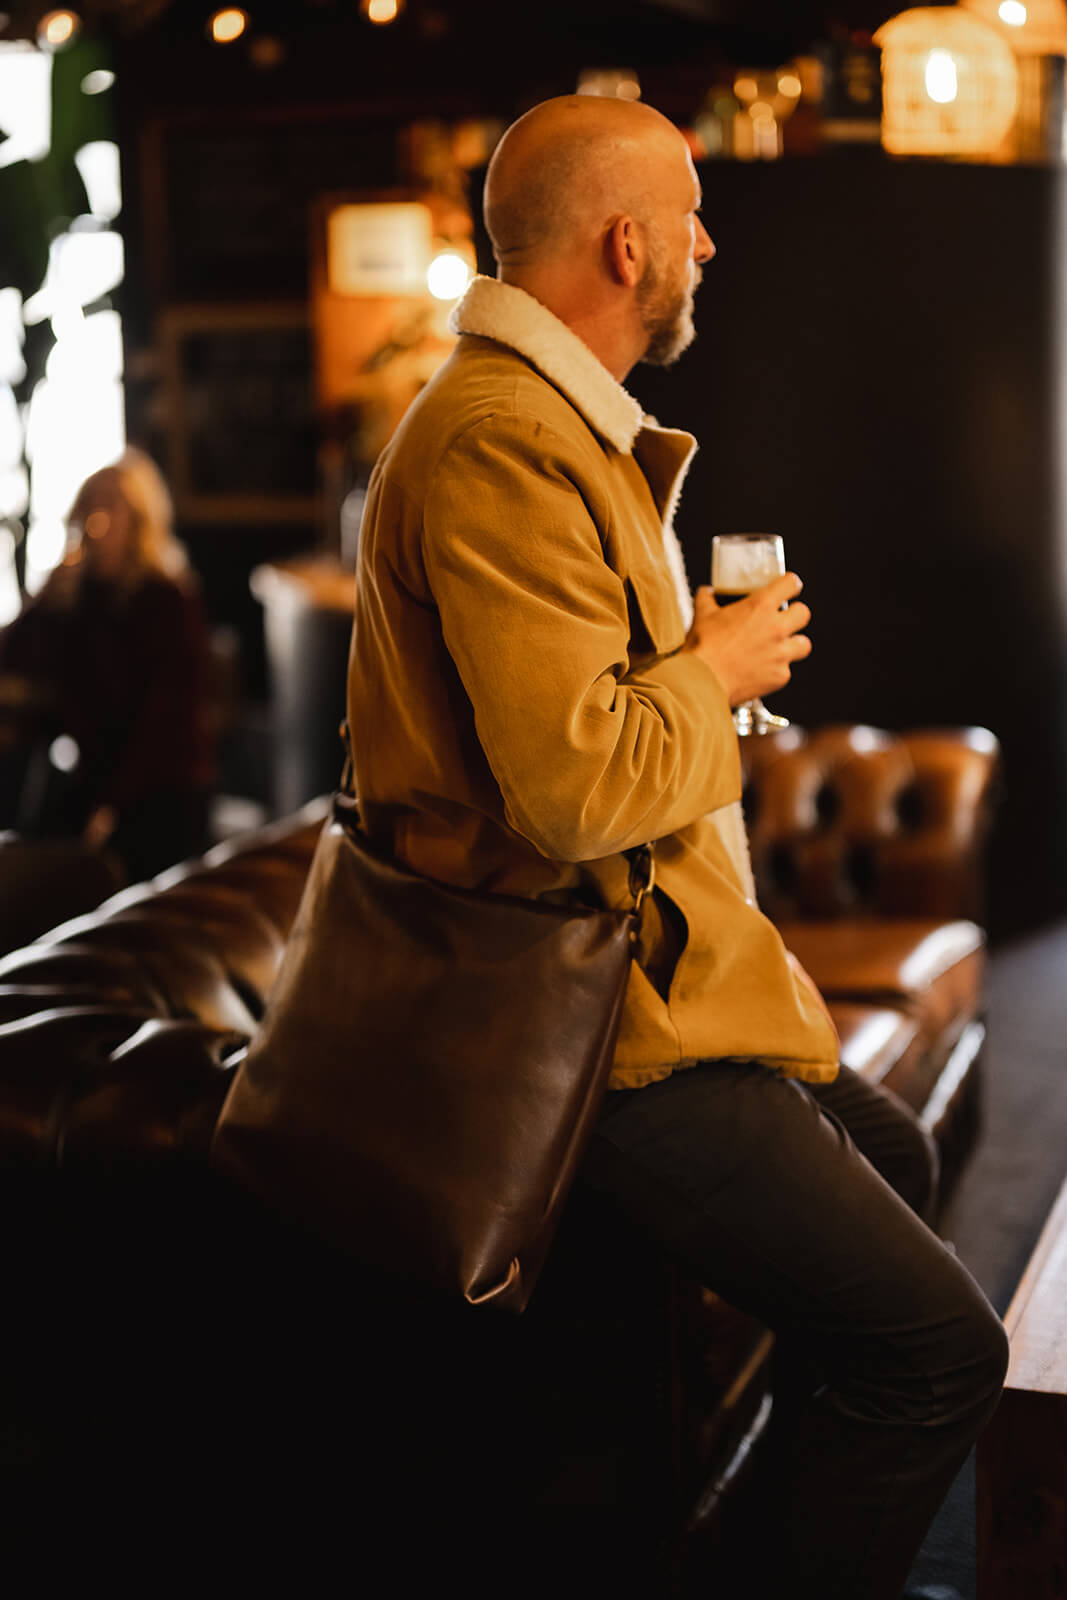 Man in sheepskin jacket sitting on arm of brown Chesterfield couch. He is holding a Guinness and wearing a brown leather crossbody bag. The bag is the Ella Jackson Chocolate Brown Leather Carryall